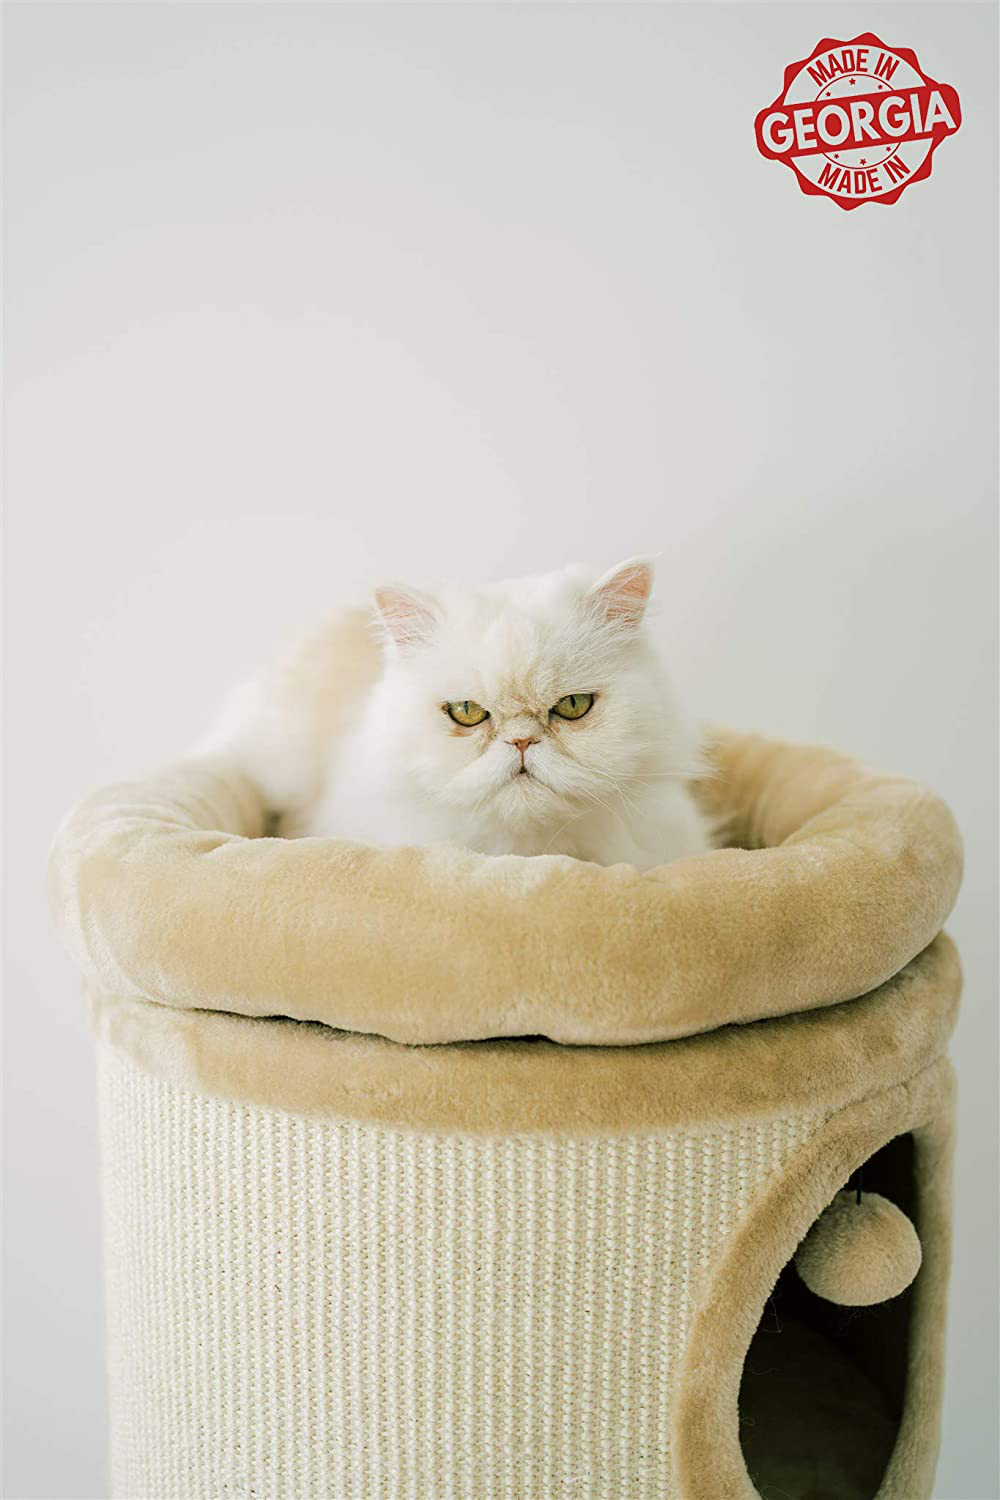 PAWMONA 37" 3 Story Cat Tree Condo Barrel Tower - Natural Sisal-Covered Scratch Cat Tree Barrel with Top High Edge Removable Snuggle Bed - Machine Washable - Made in Georgia